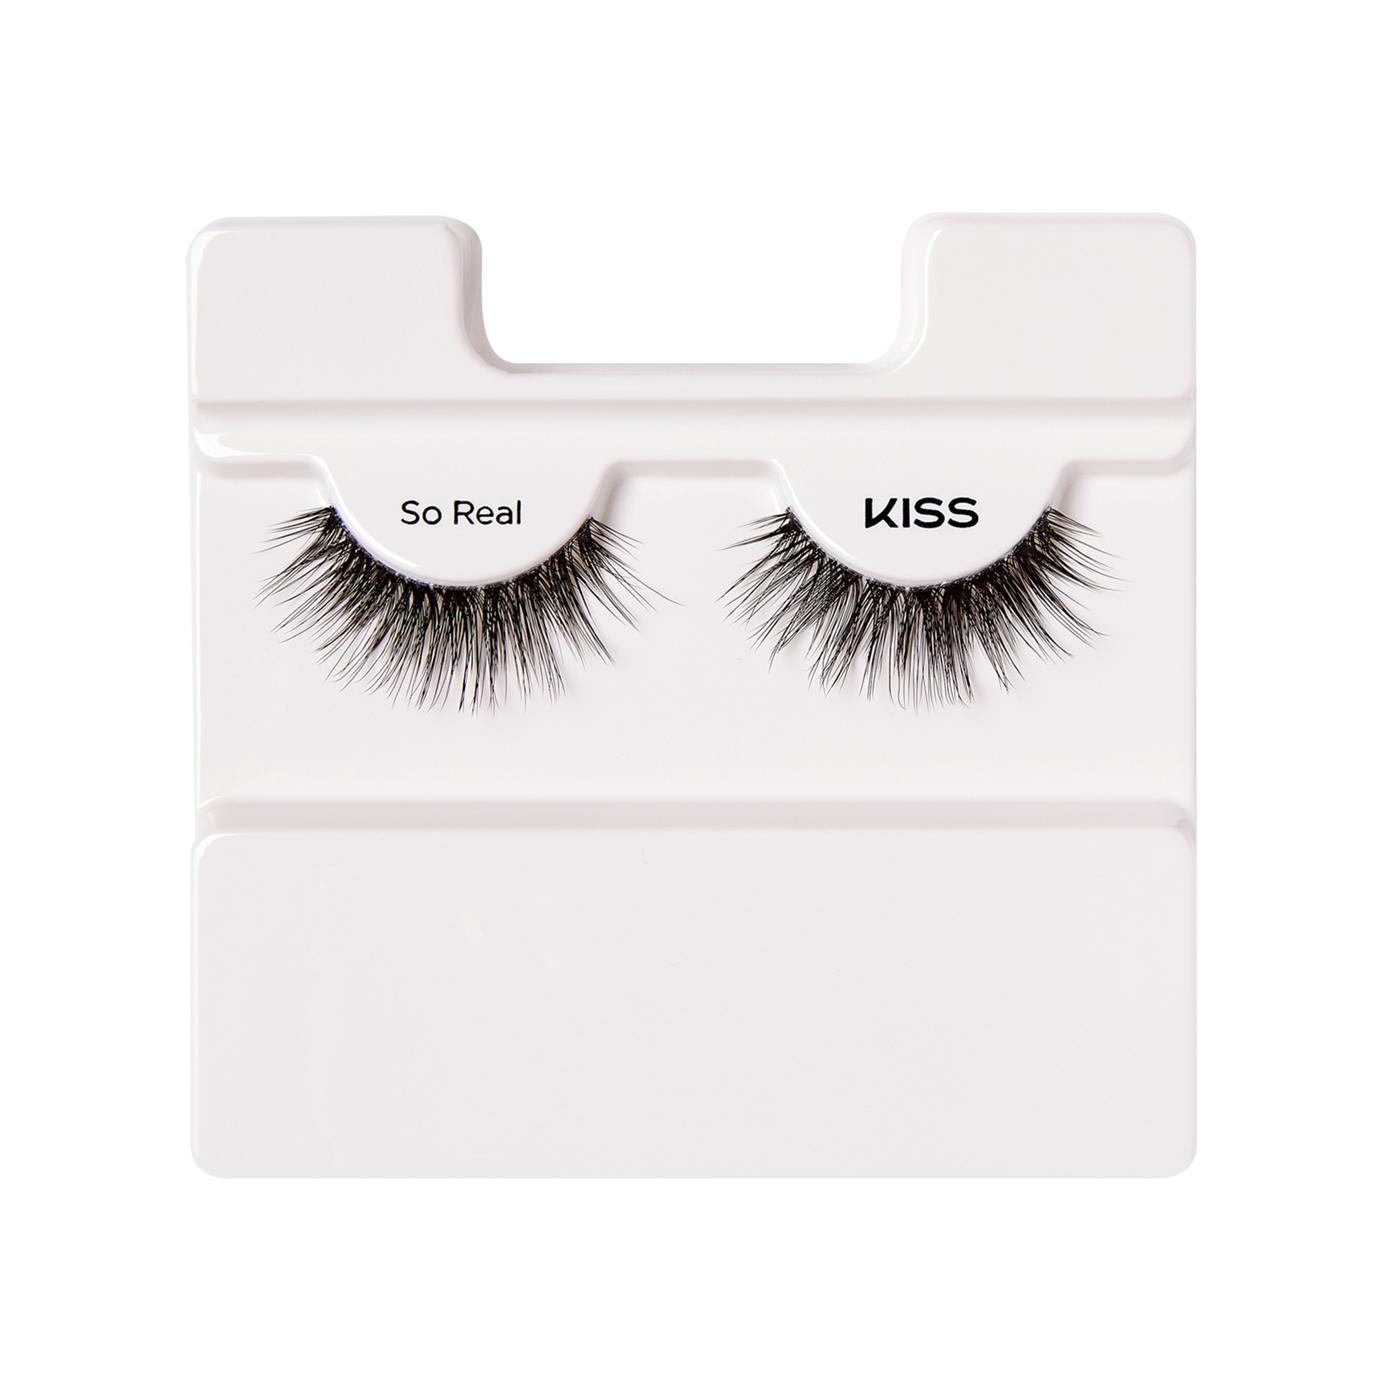 KISS Lash Couture Luxtensions Collection Eyelashes - Royal Silk